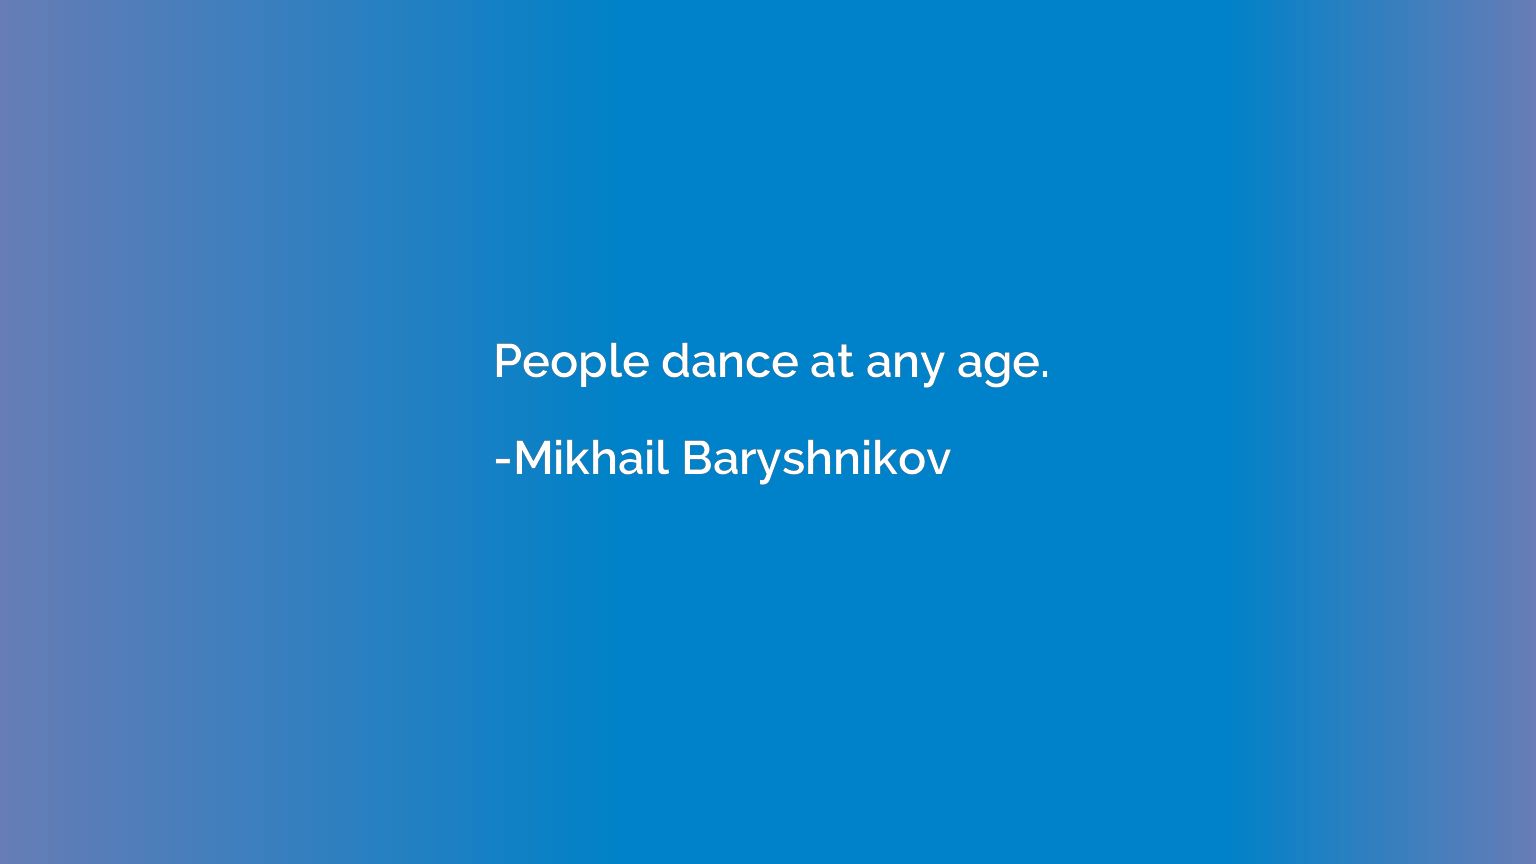 People dance at any age.